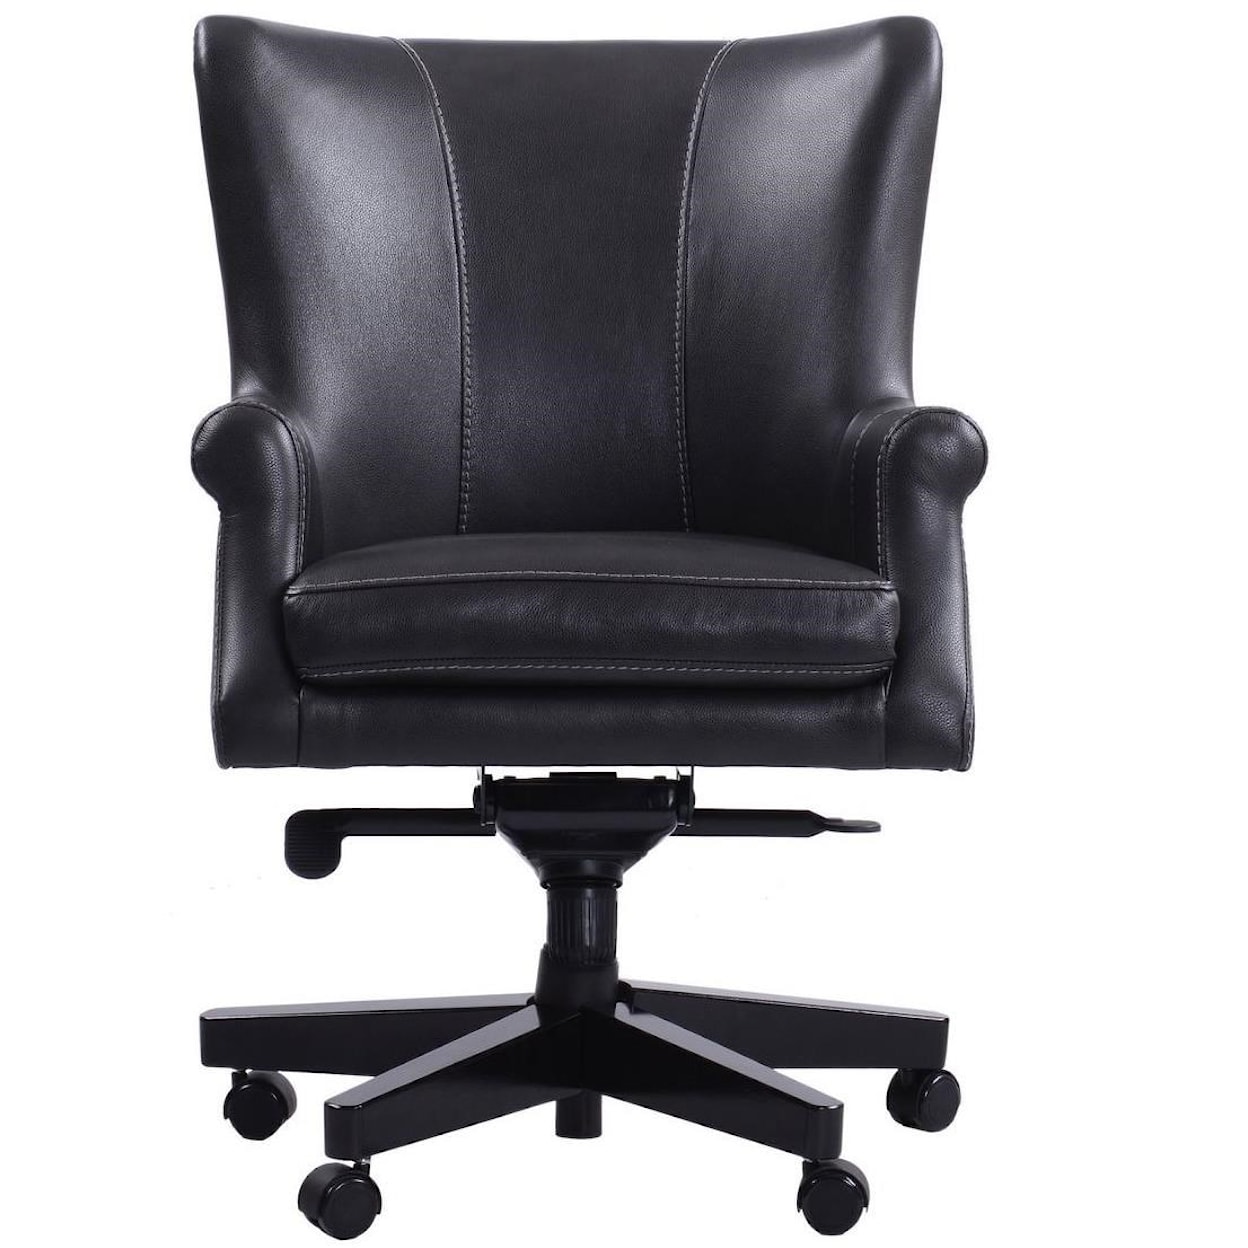 Carolina Living Desk Chairs Leather Desk Chair